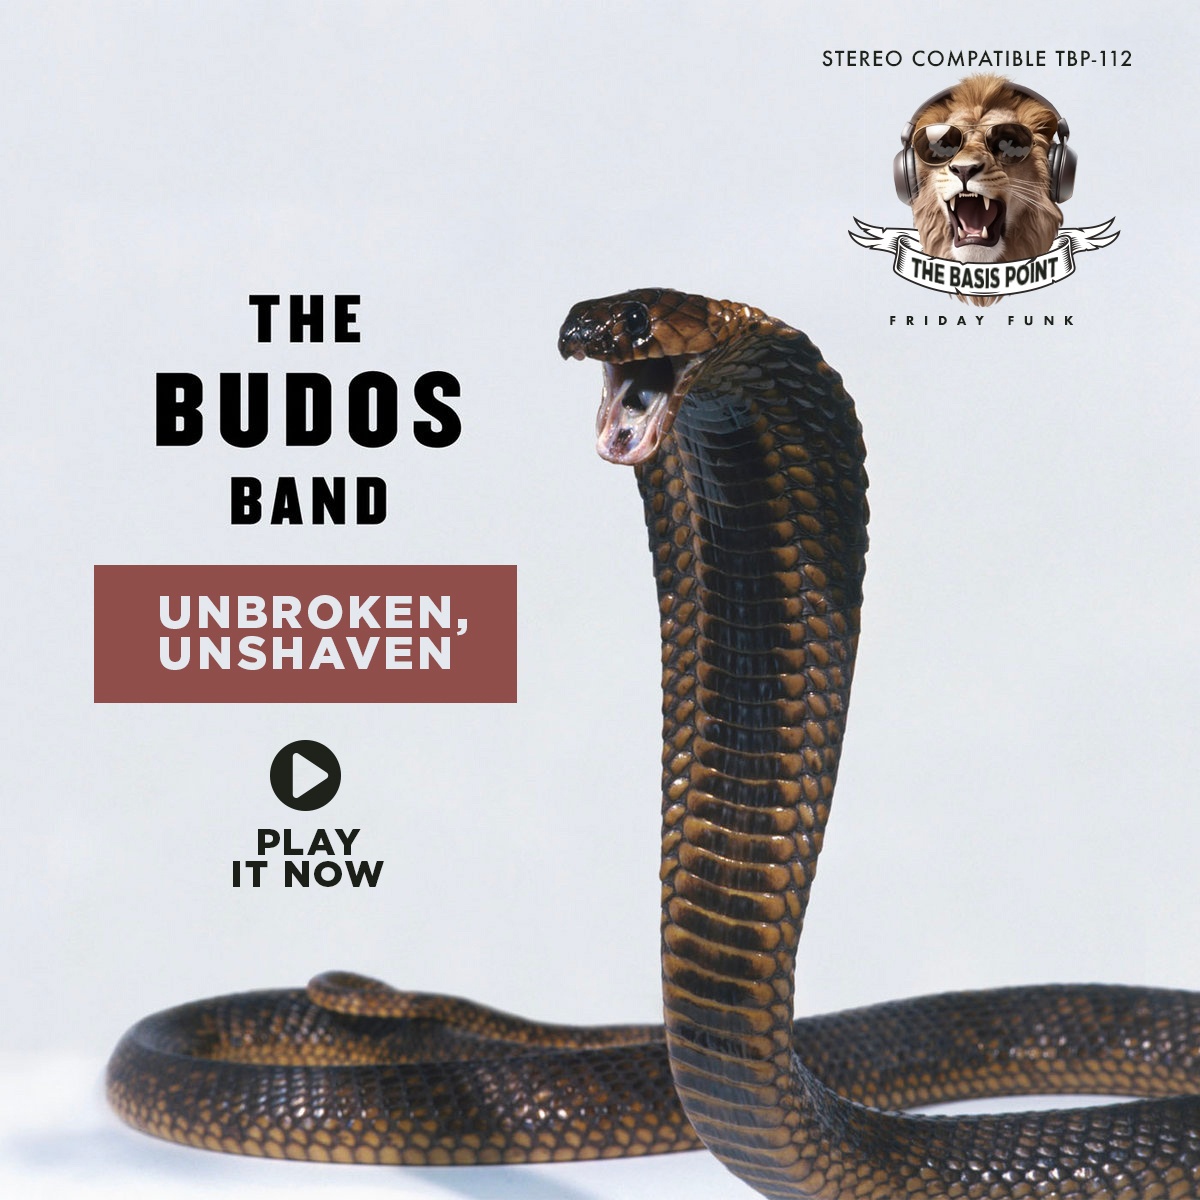 The Basis Point Friday Funk Installment 112 - Budos Band - Unbroken Unshaven - Play It Now